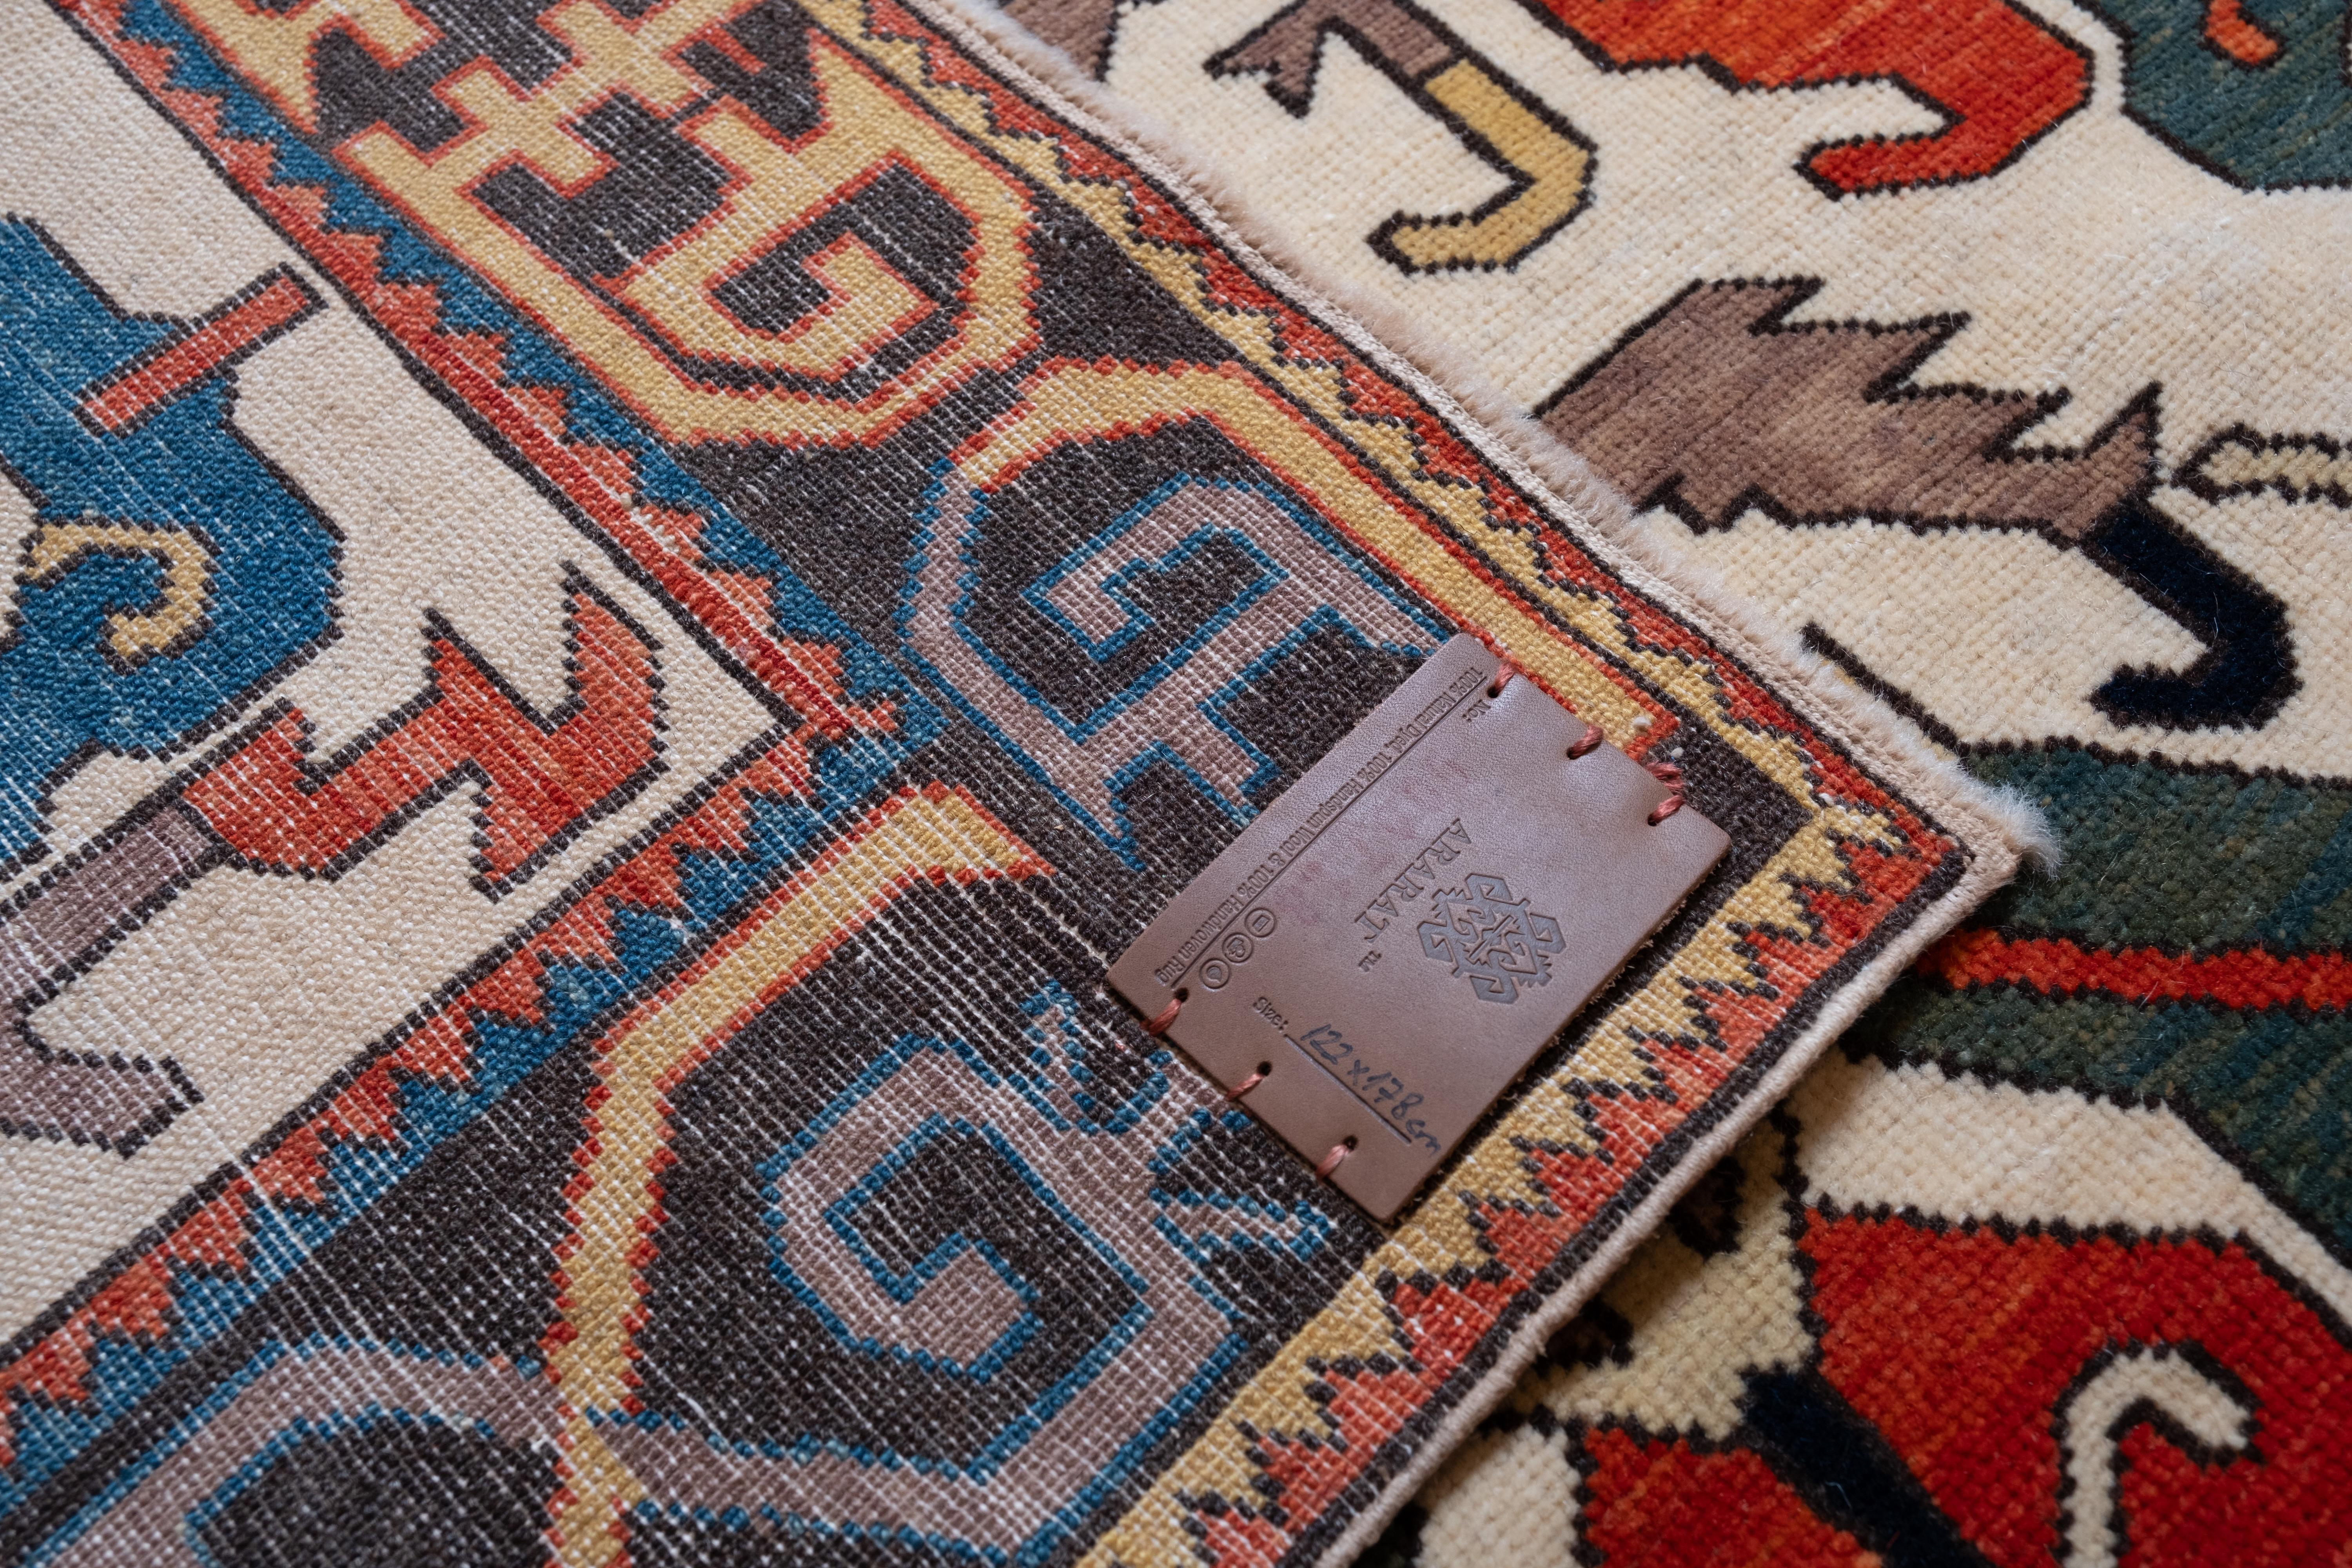 Wool Ararat Rugs Kuba Rug with Palmettes Caucasian 19th C. Revival Rug, Natural Dyed For Sale